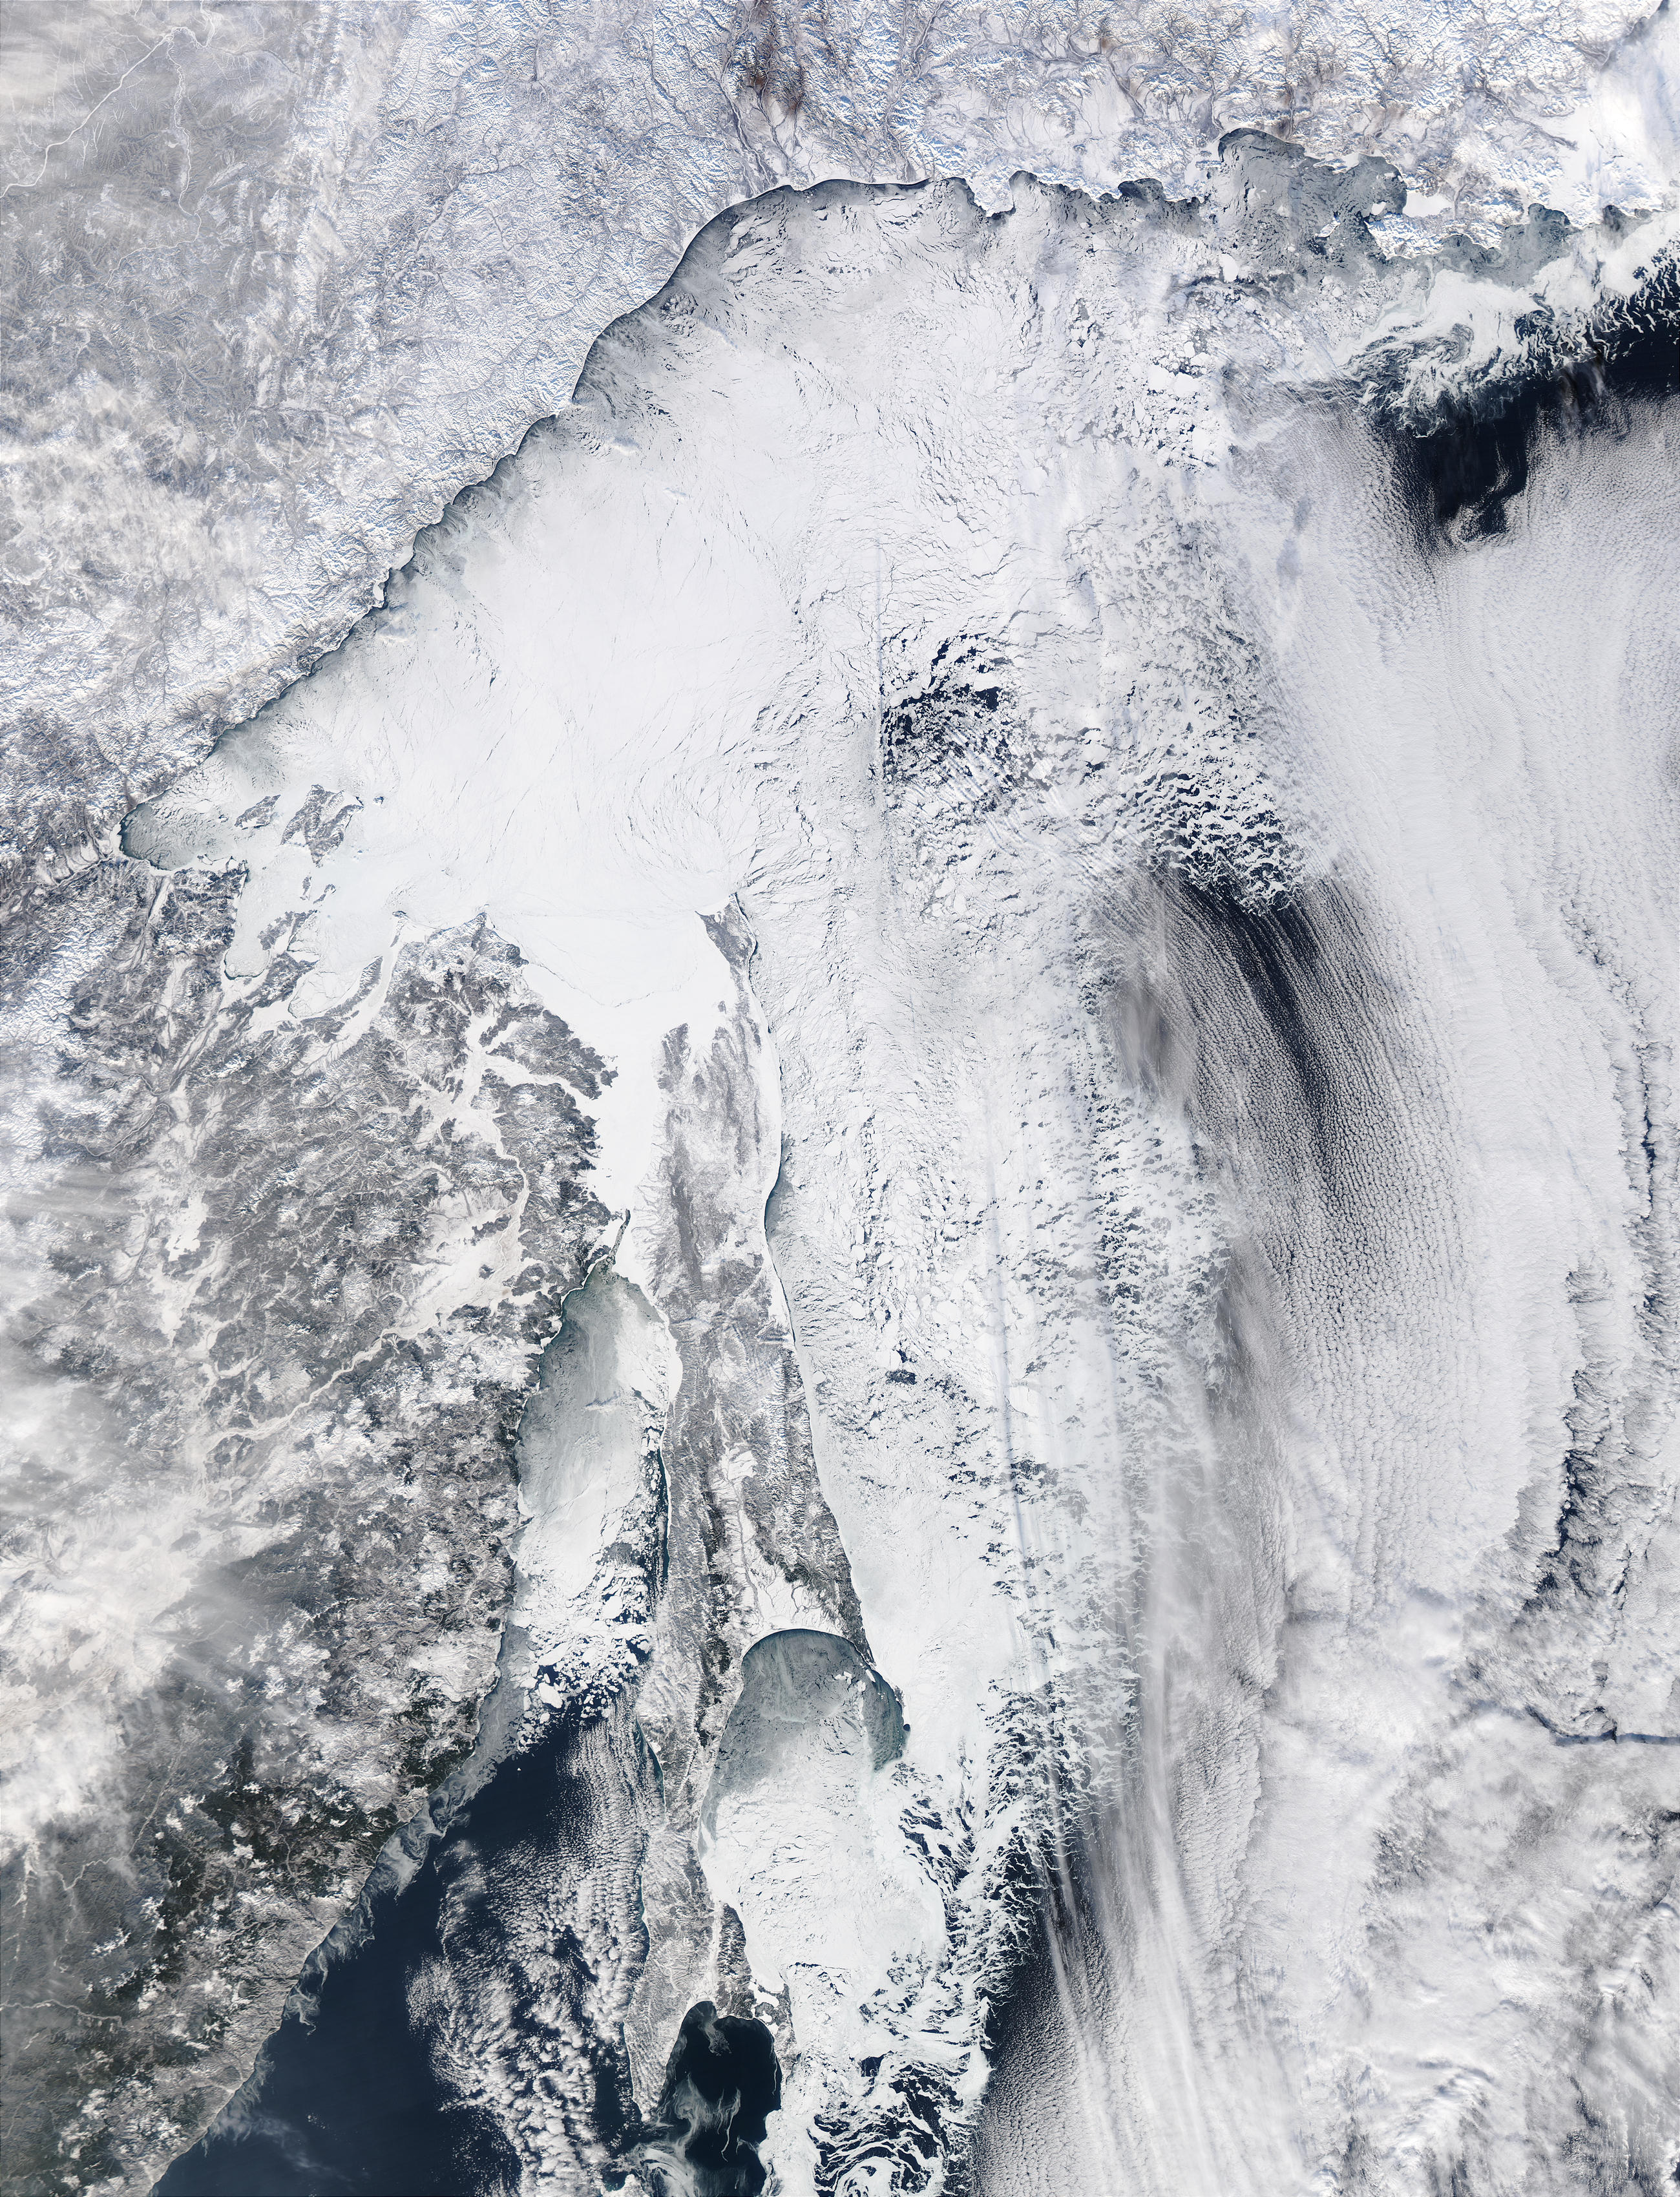 Sea of Okhotsk and Sakhalin Island, Eastern Russia - related image preview